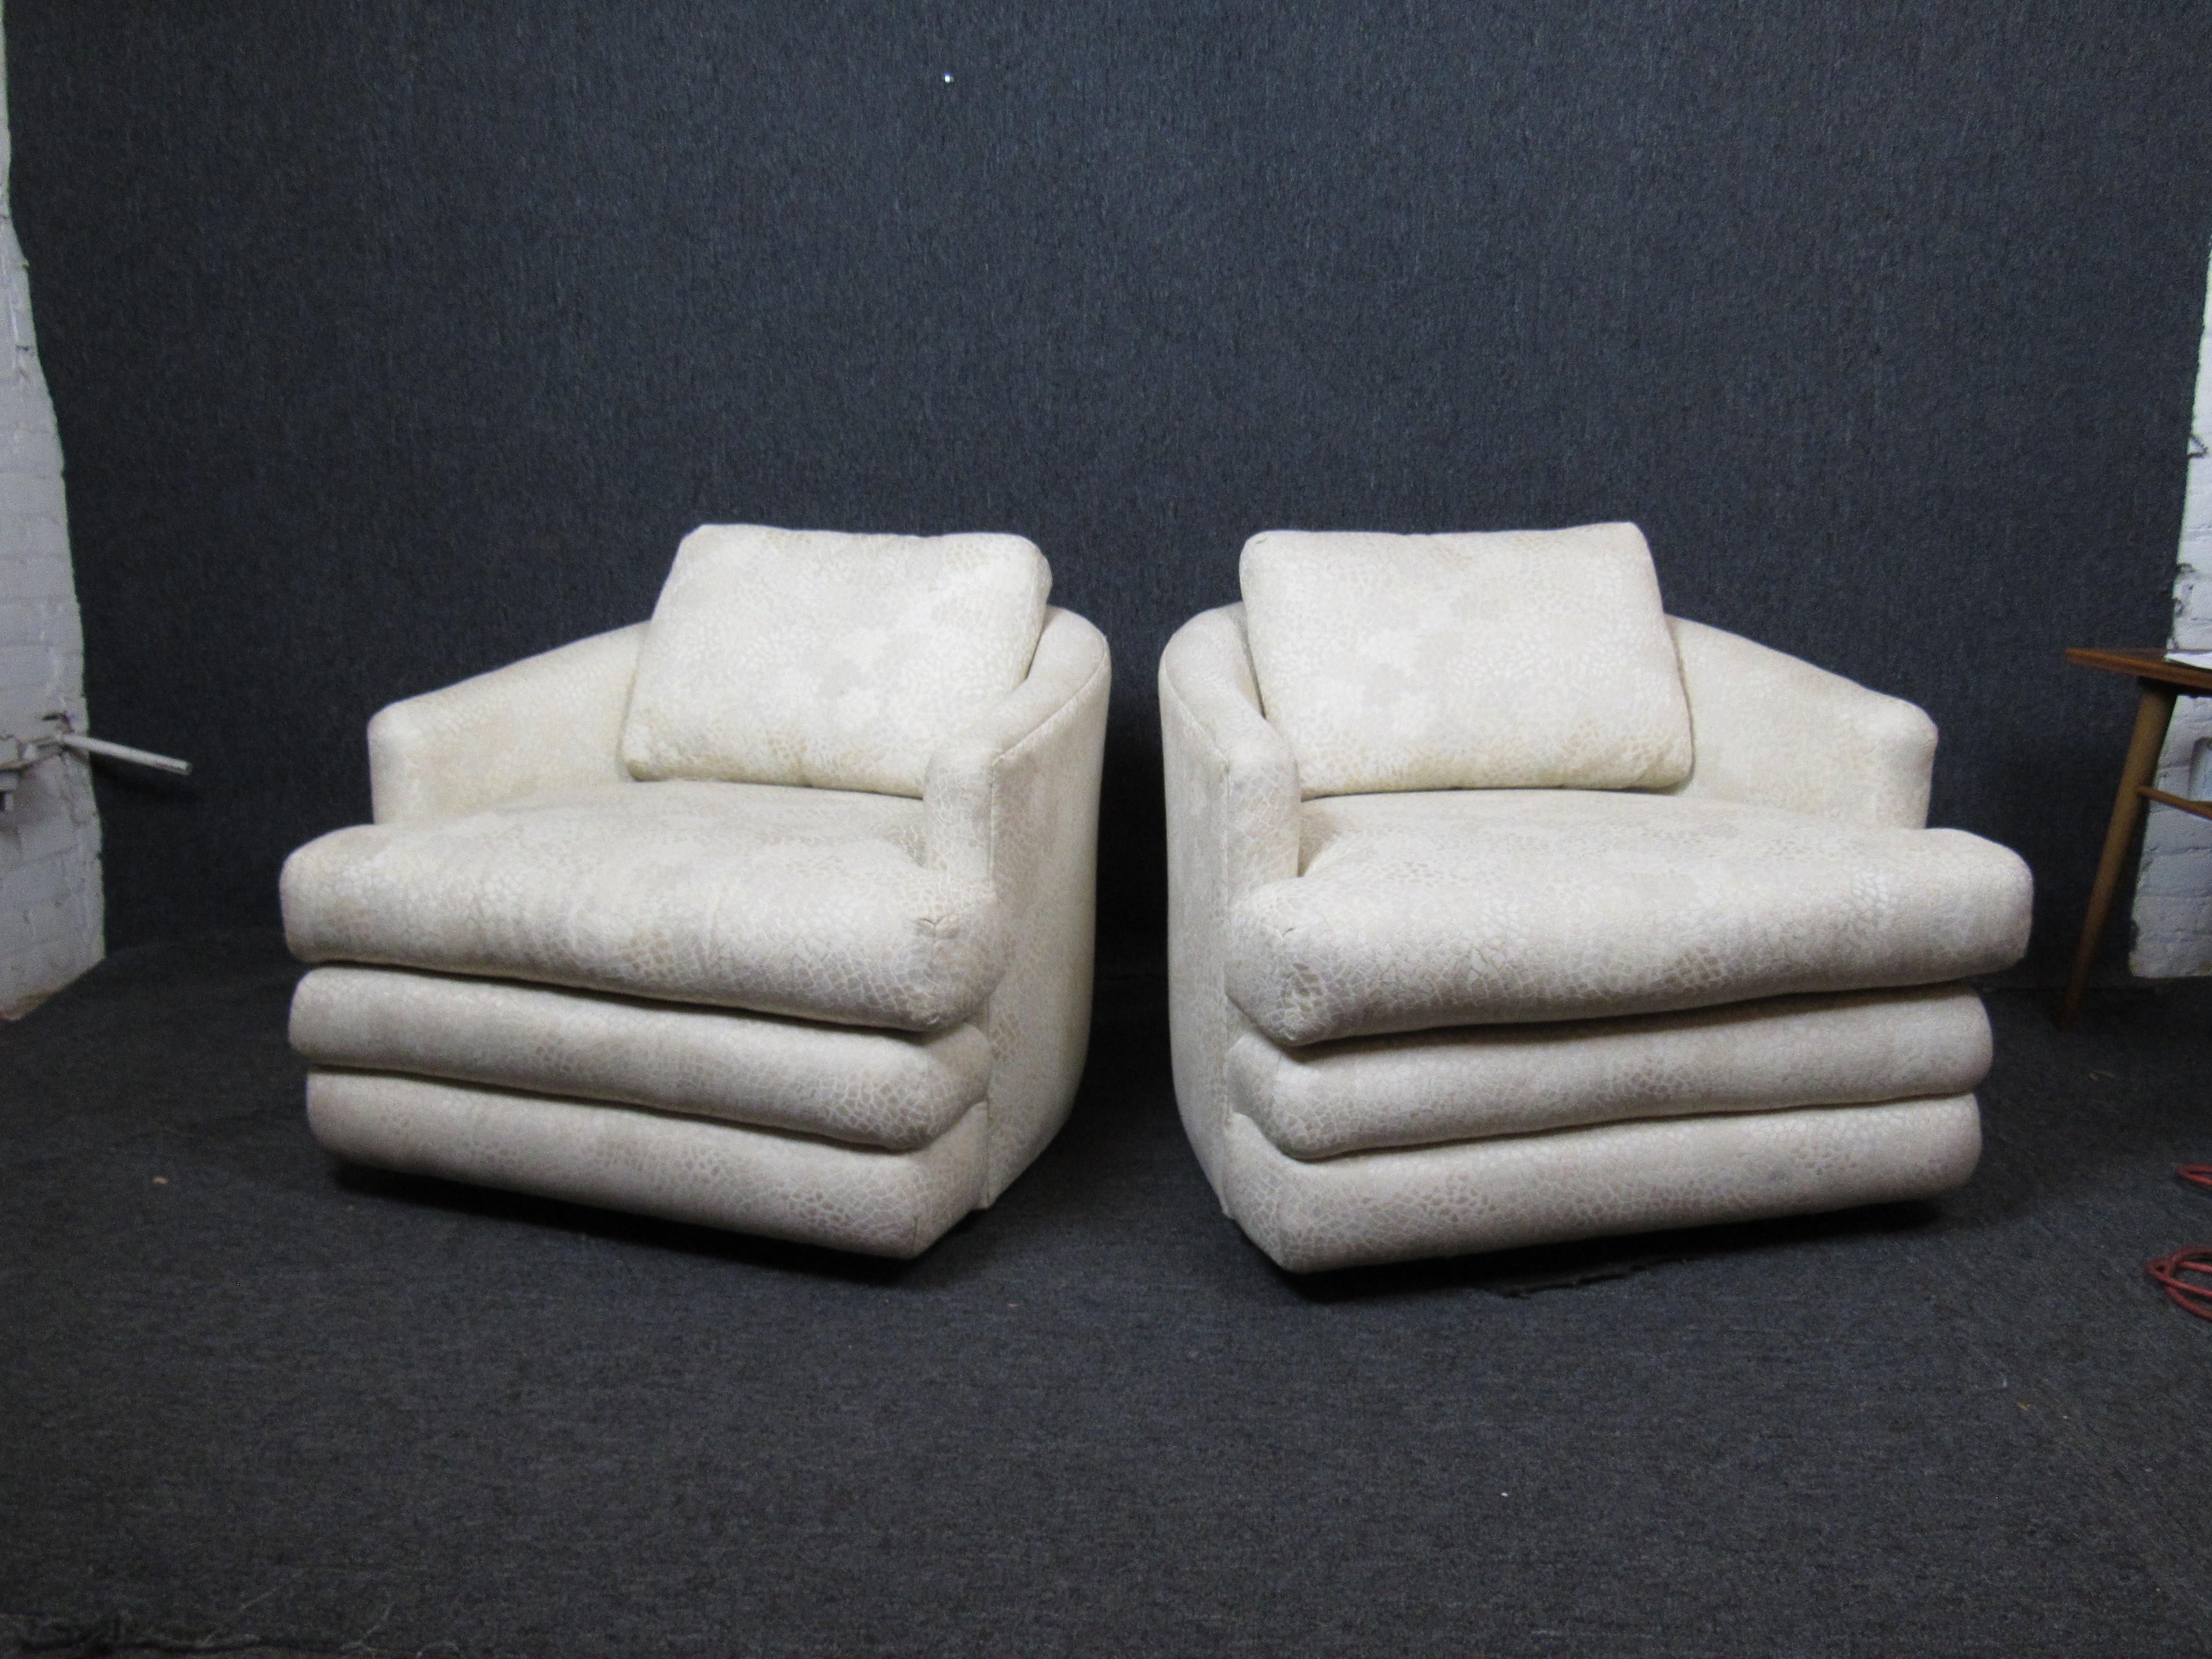 Awesome pair of plush lounge chairs with a funky, snakeskin-like fabric. Oversized, cushy seats sure to provide hours of comfort to you or your guests. Perfect for the home, office, or anywhere in between. Chairs are on casters to make rearranging a